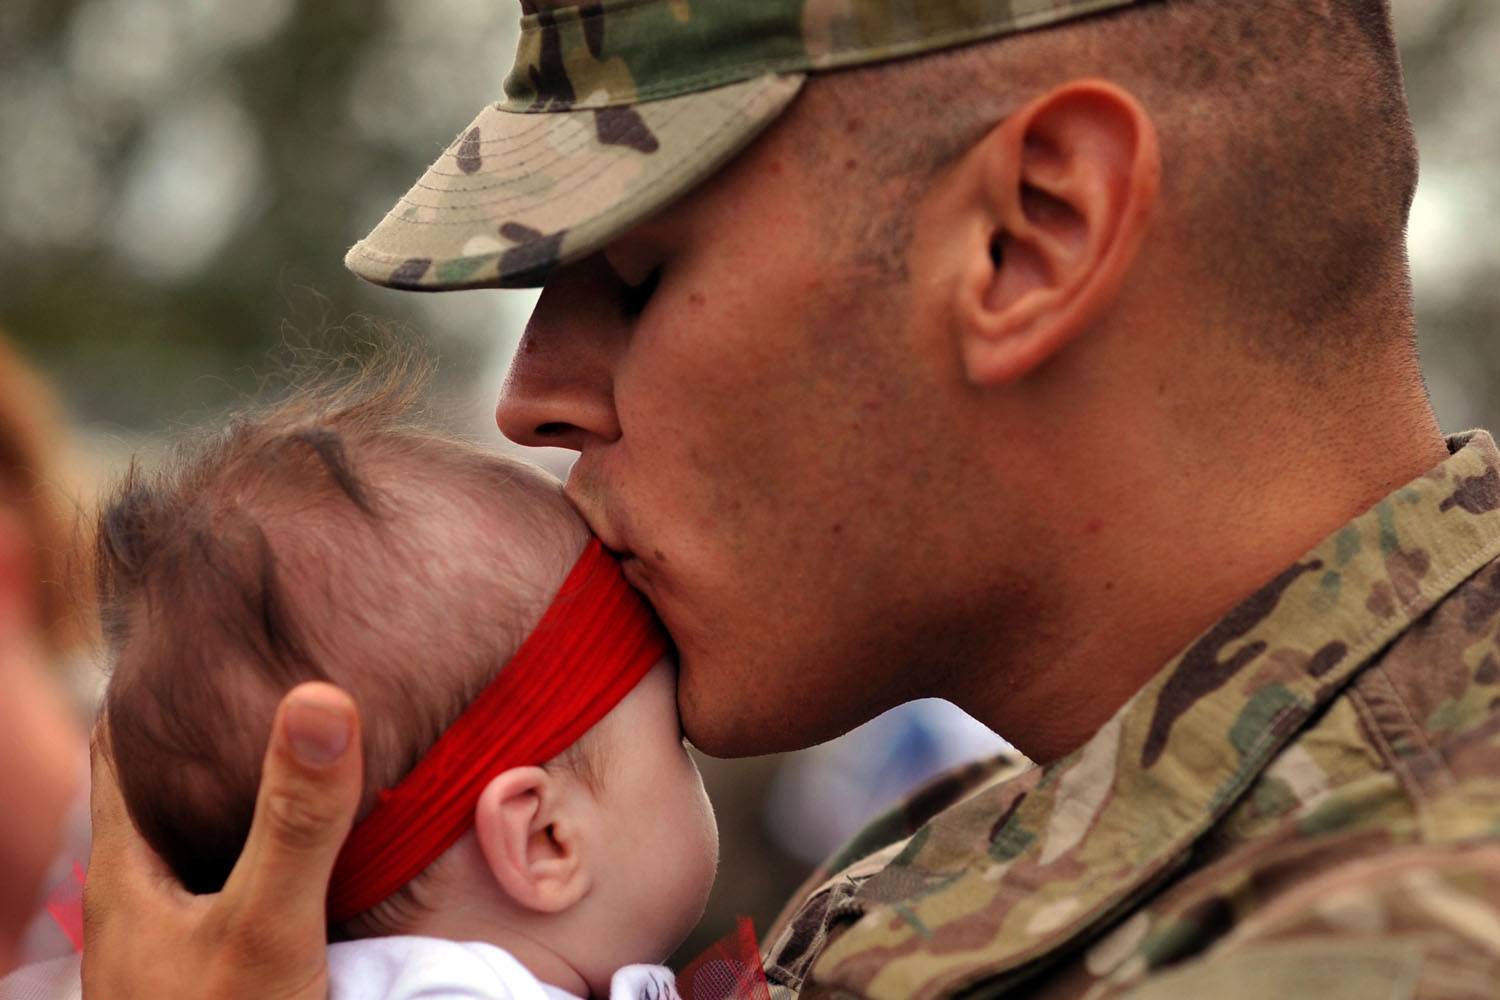 Oct. 10, 2012. Army Spc. Cory Allen kisses his daughter, Lacey Allen, during a welcome home ceremony for soldiers from the Army's 1st Battalion, 30th Infantry Regiment, at Fort Stewart, Ga. One hundred troops returned home after their first deployment to Afghanistan.